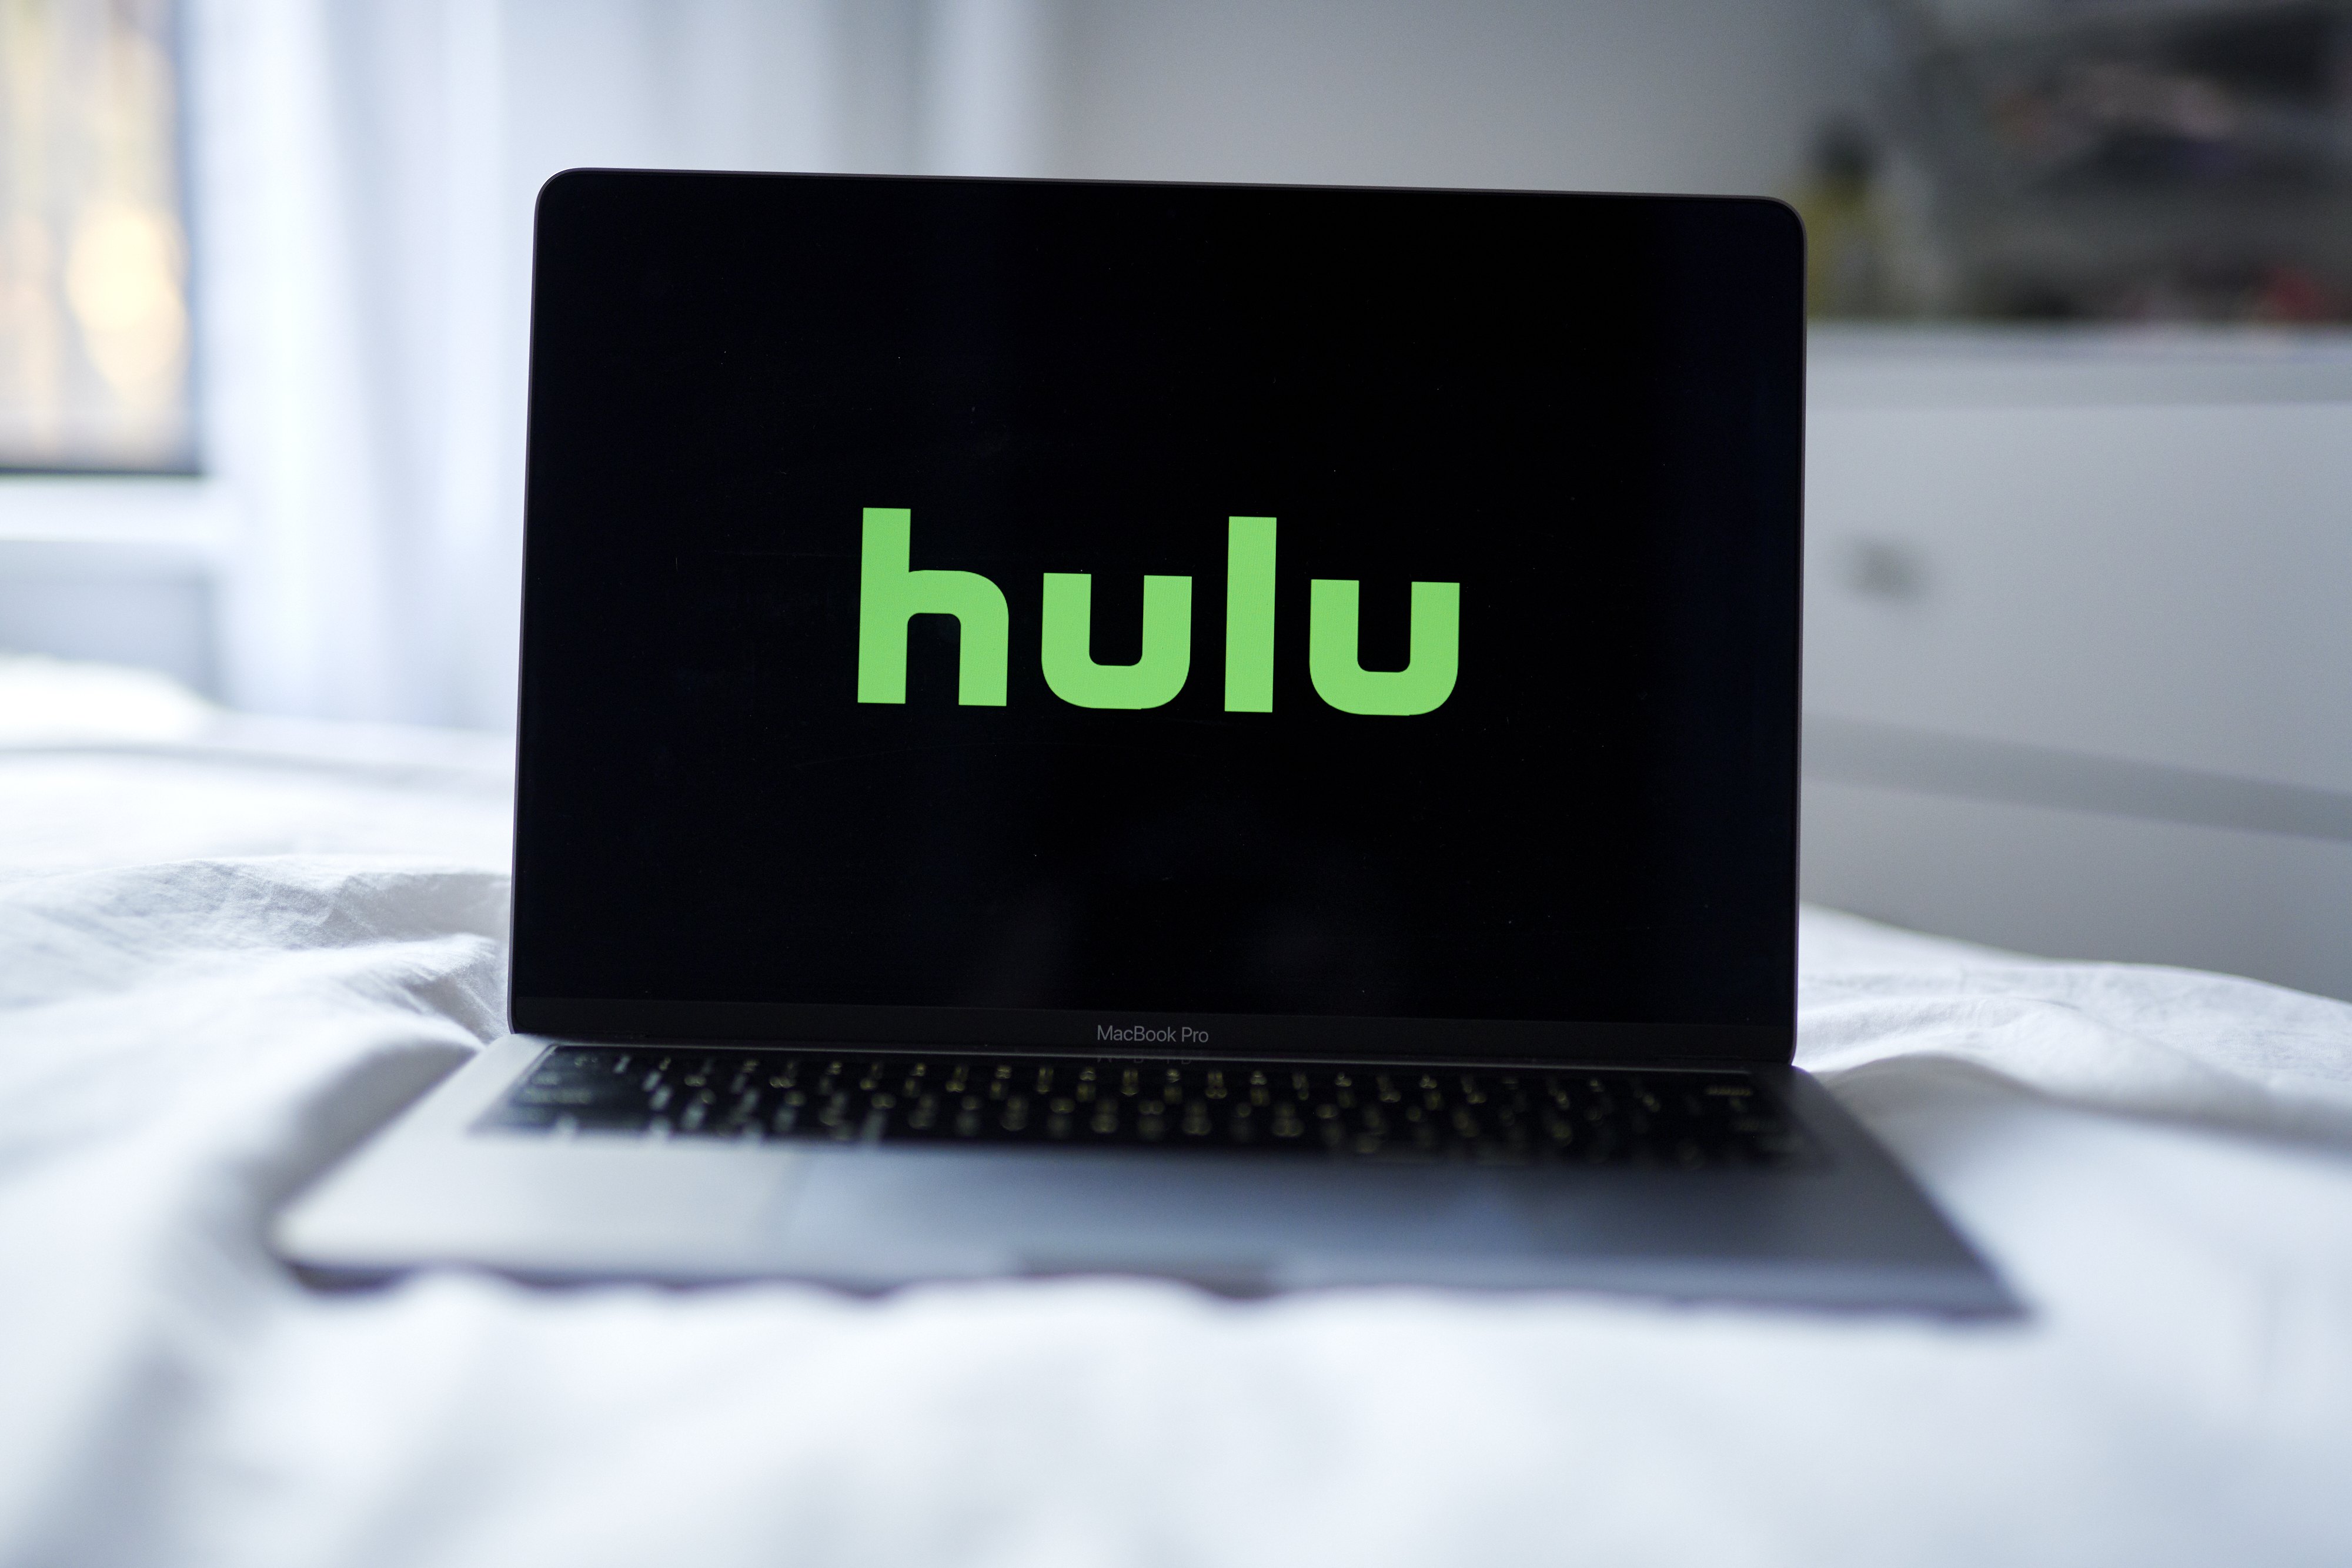 Comcast Will Start Talks to Sell 100% of Hulu to Disney Next Week – Here is Everything We Know